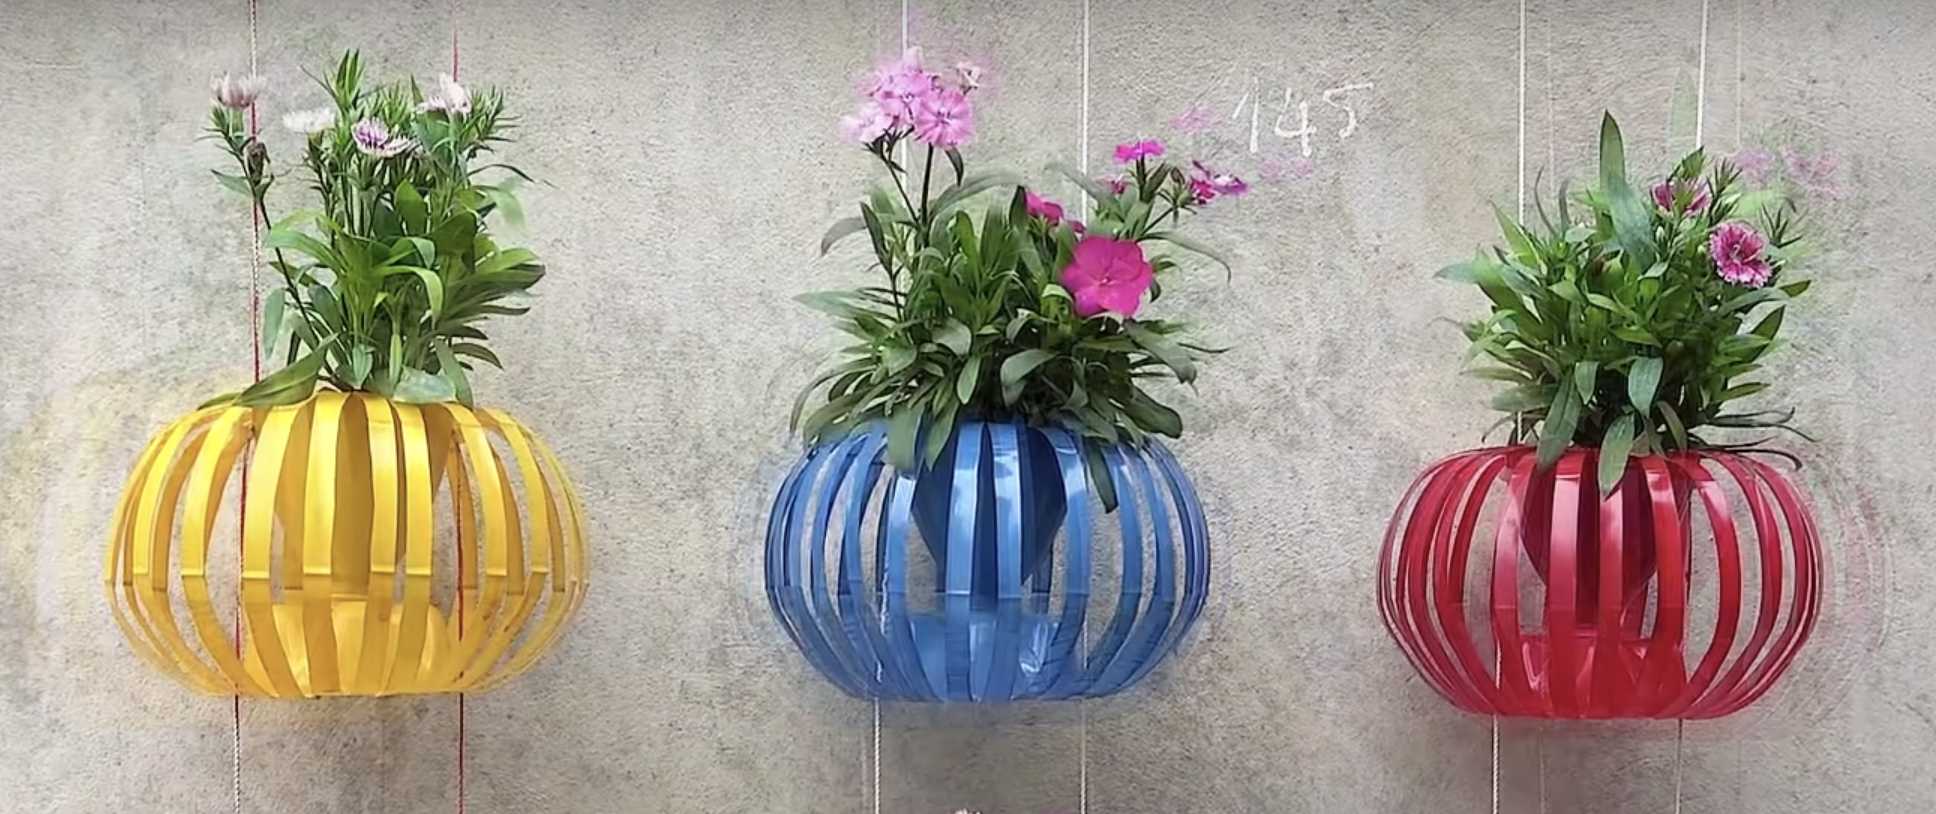 Flower Pots From Recycled Materials